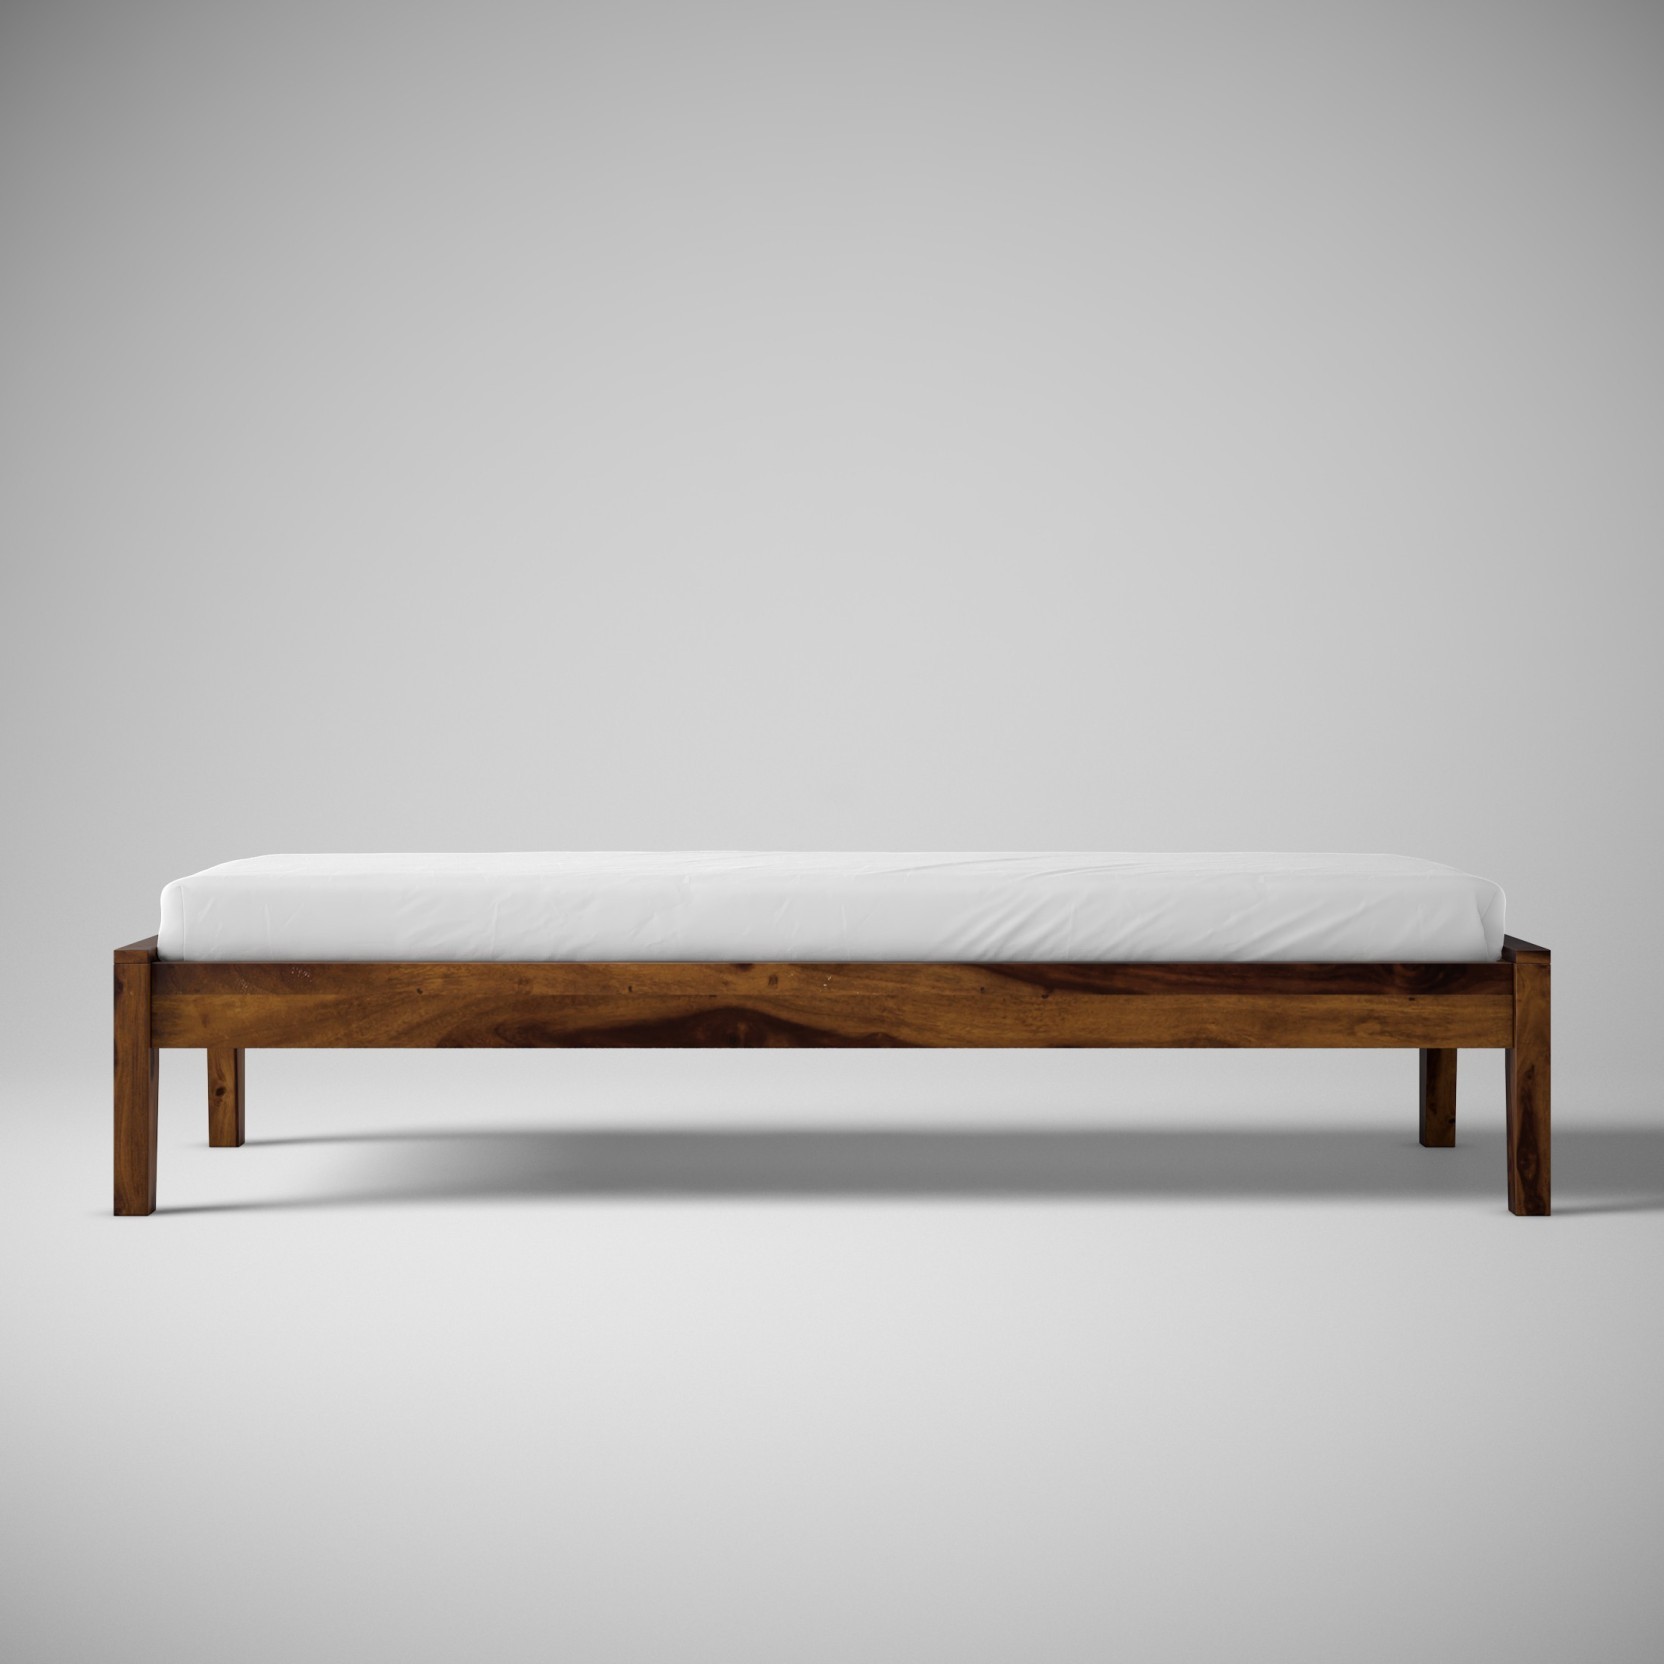 Aaram By Zebrs Sheesham Wood Bed Without Storage Solid Wood Single Bed (Finish Color - Walnut, Delivery Condition - DIY(Do-It-Yourself))